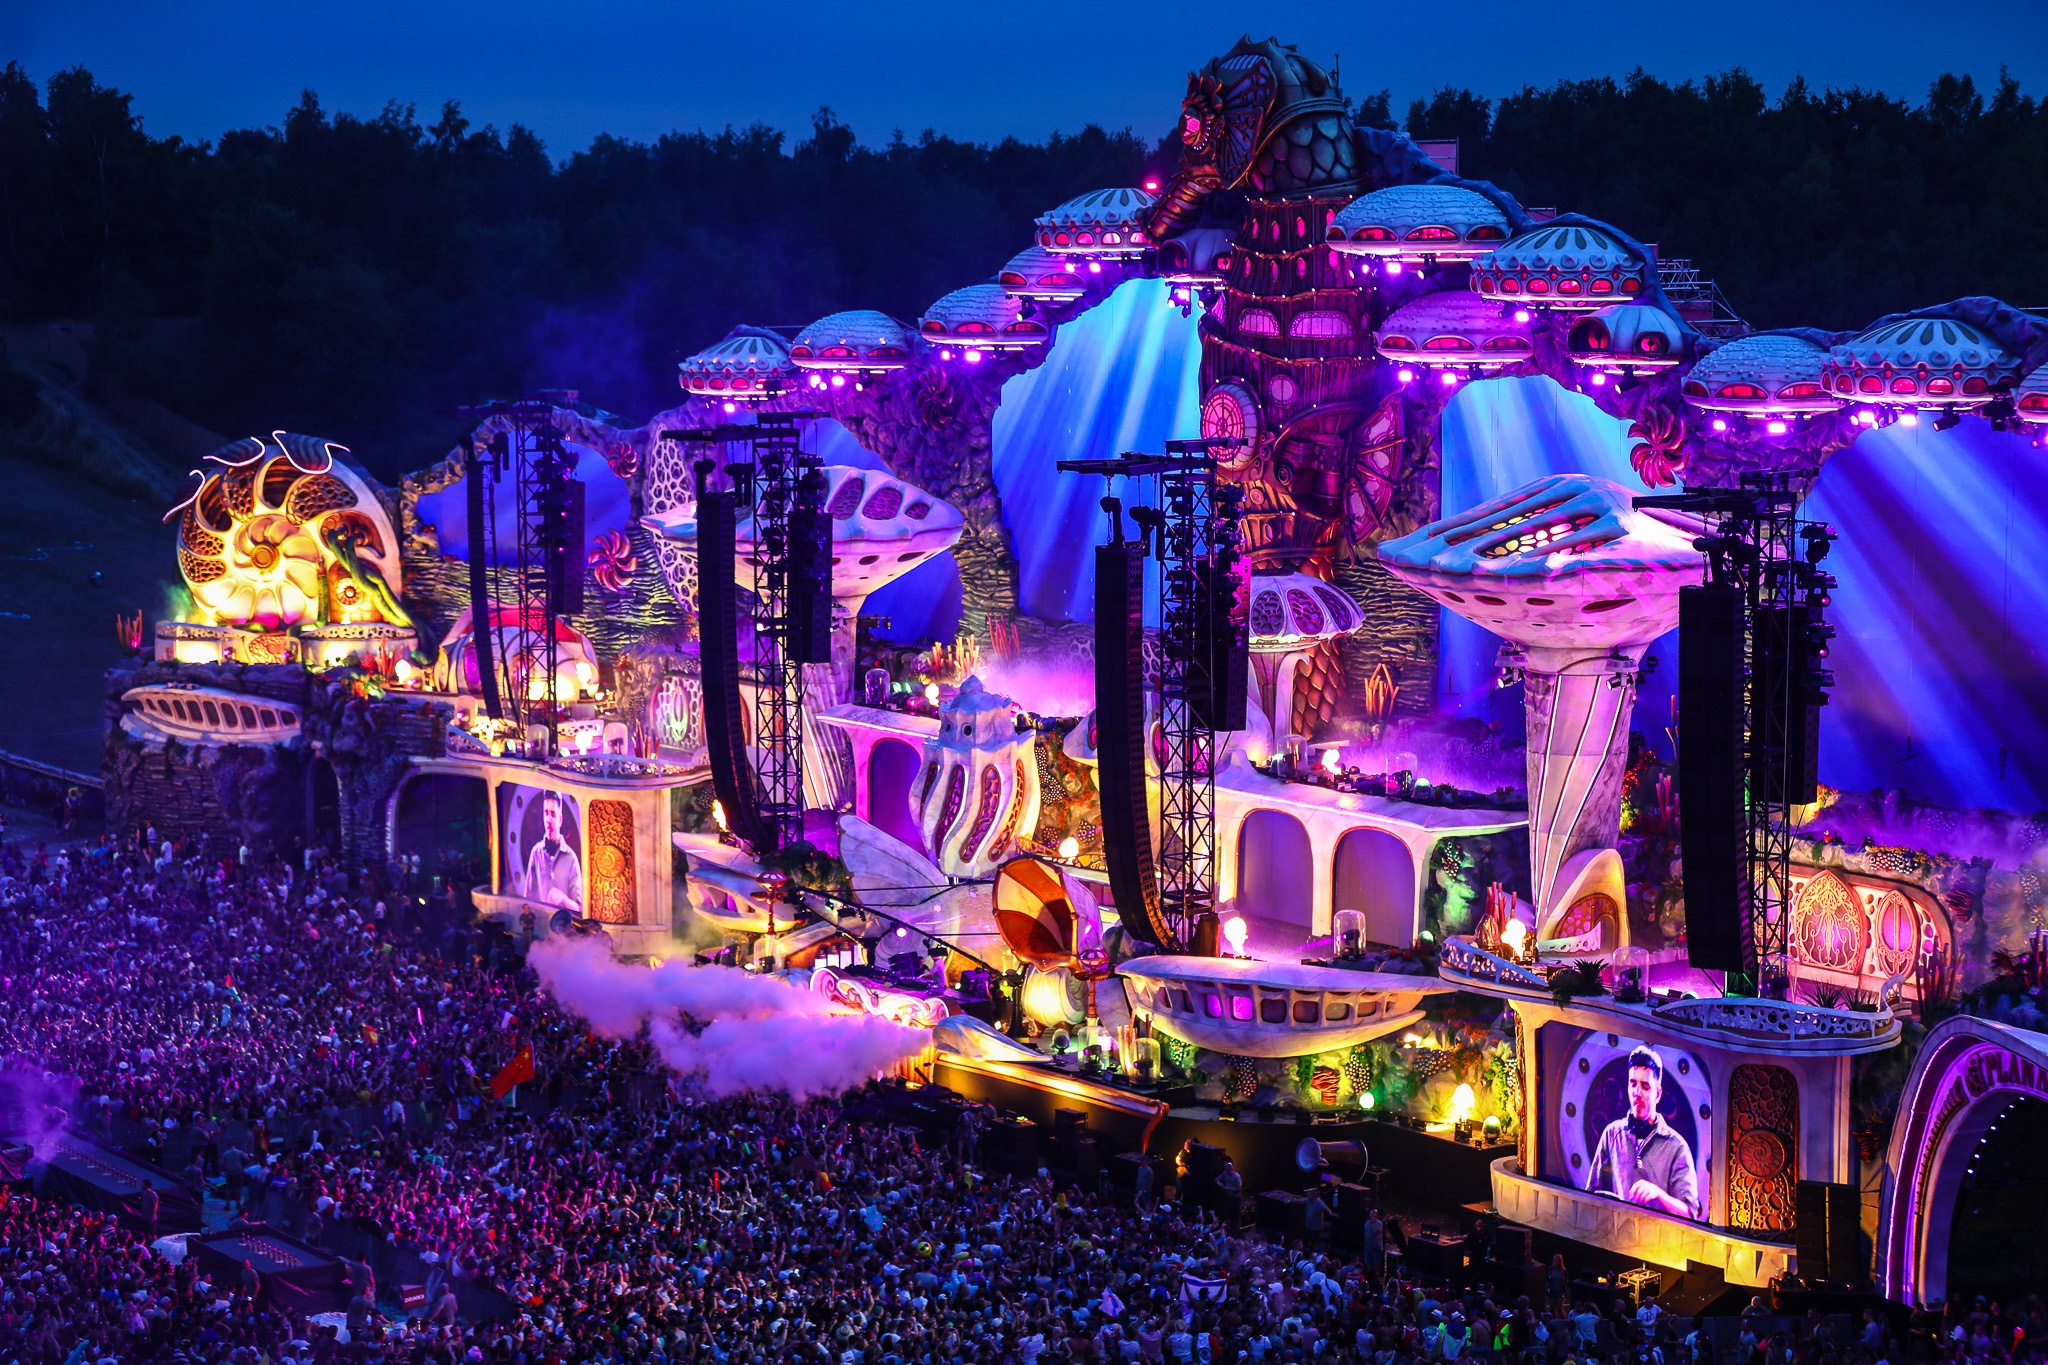 K series sound system set up by L-Acoustics at the Tomorrowland Festival